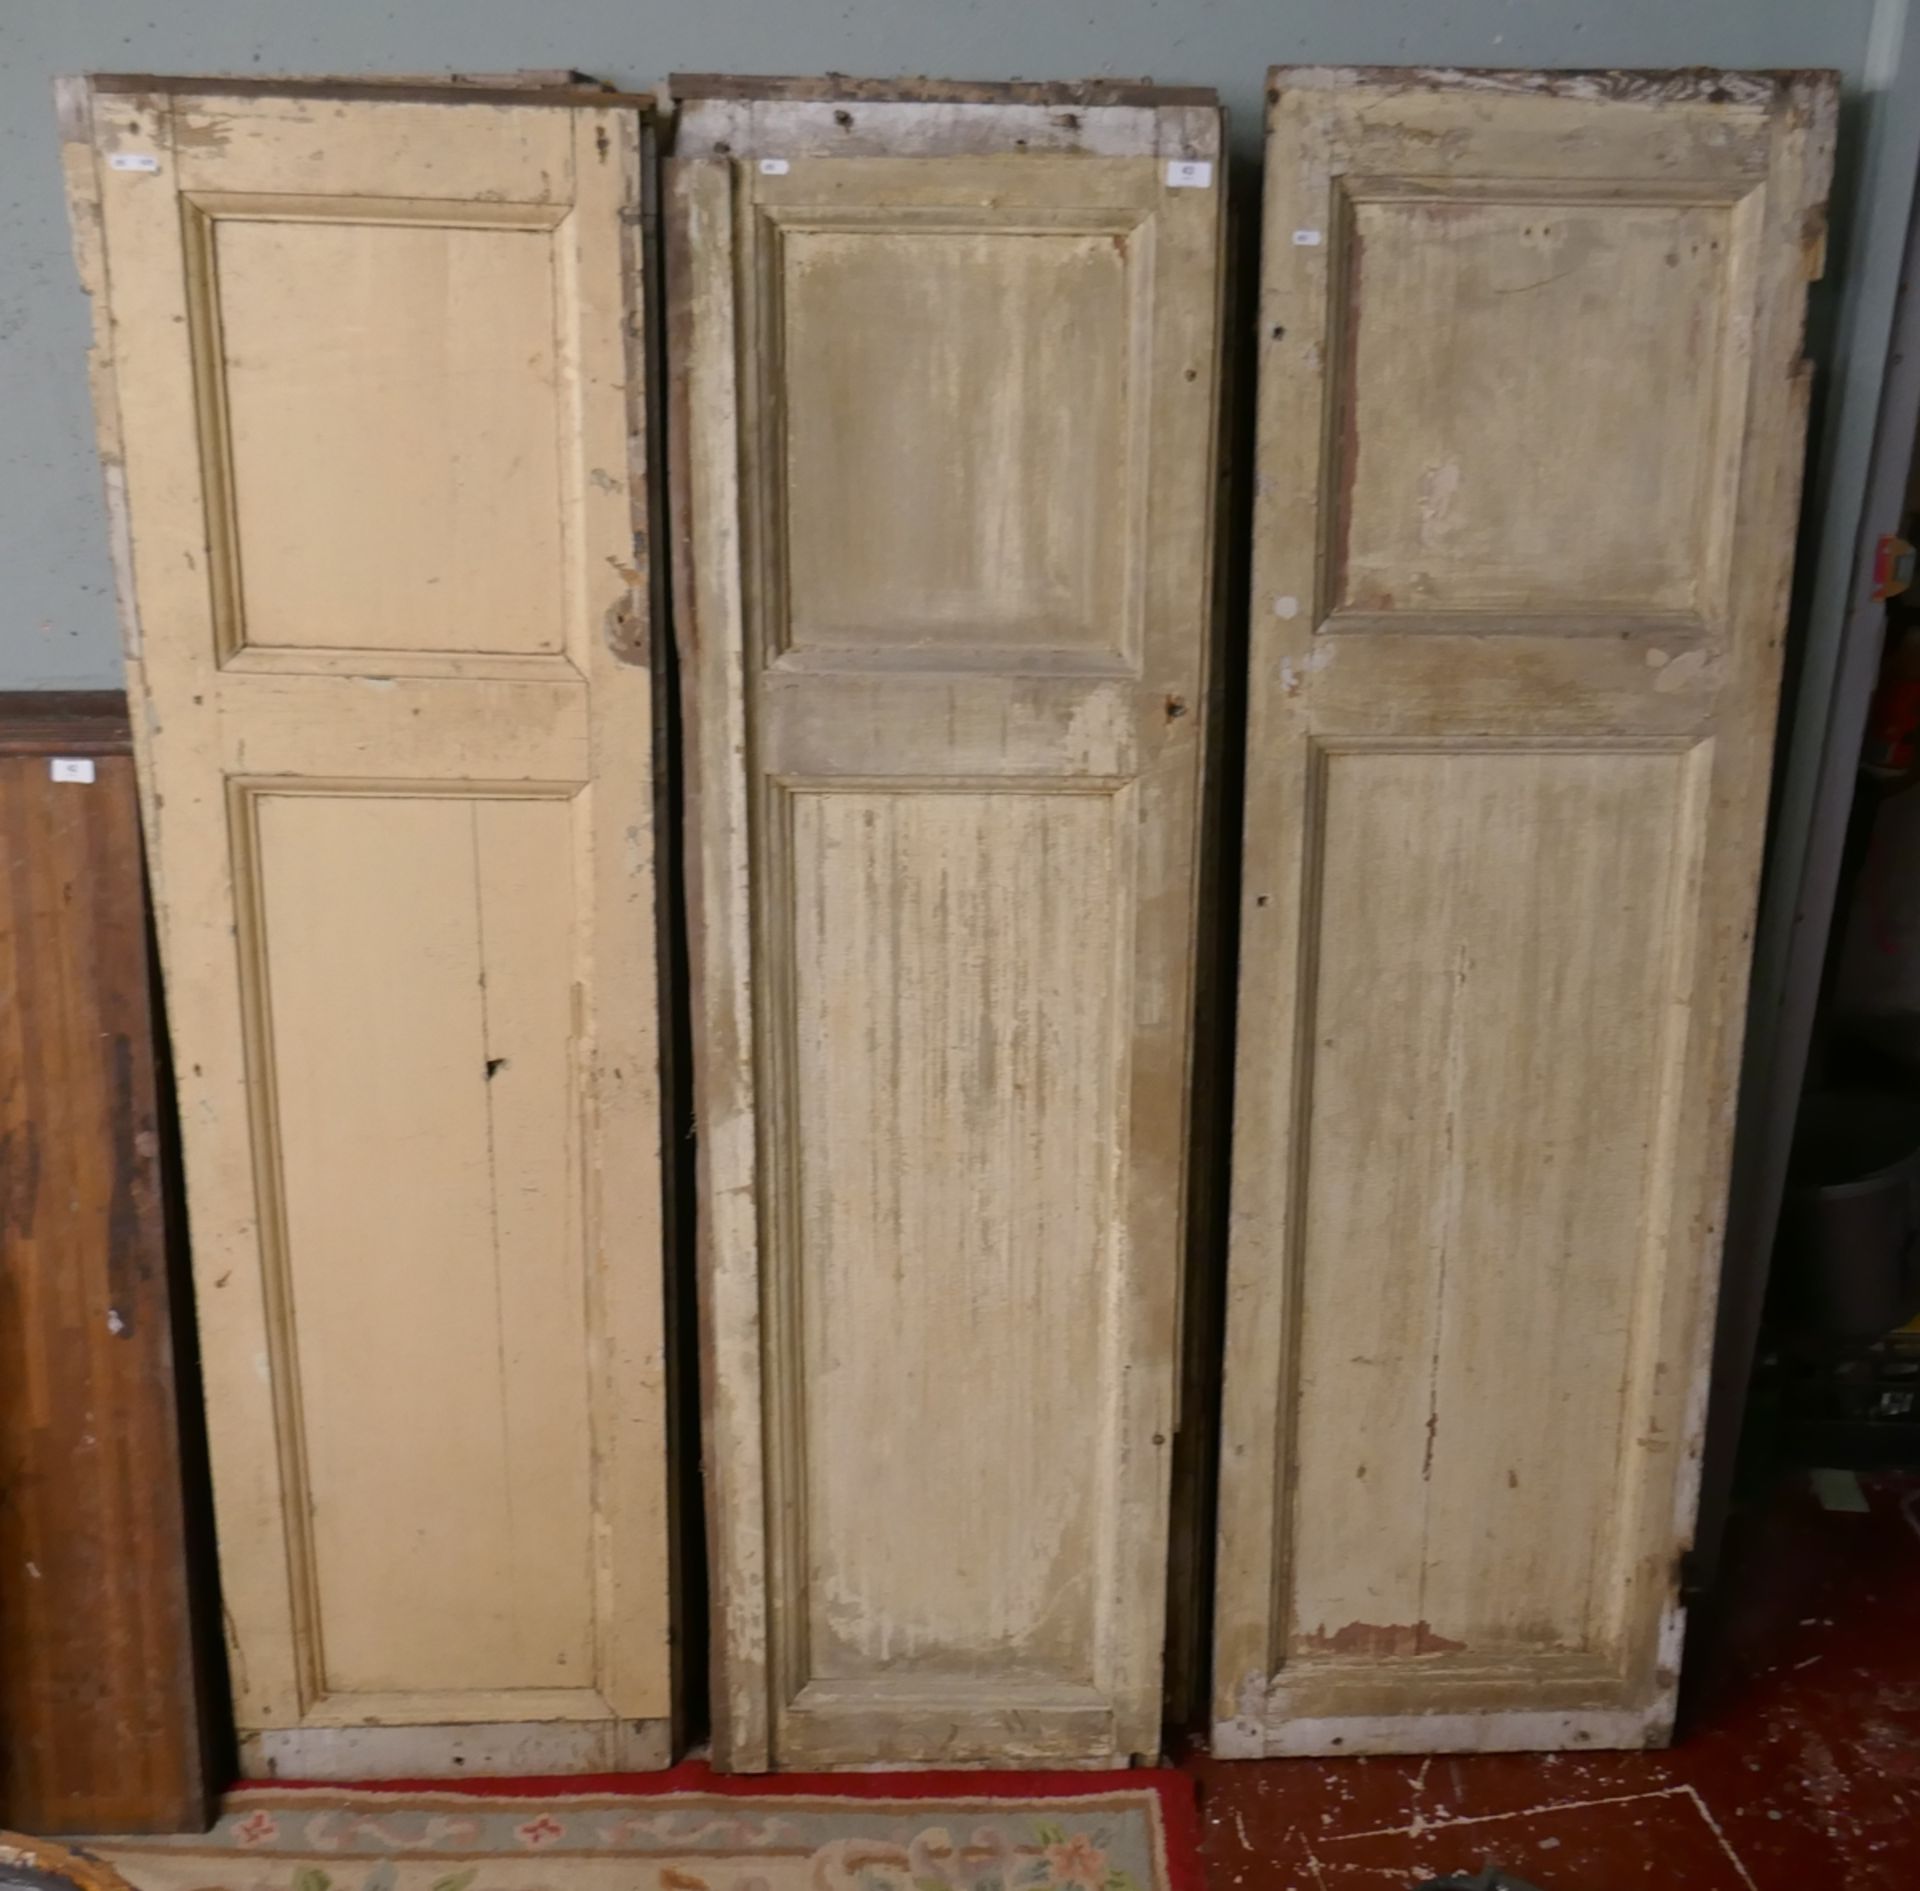 8 large pieces of wood panelling - approx 185cm x 55cm each